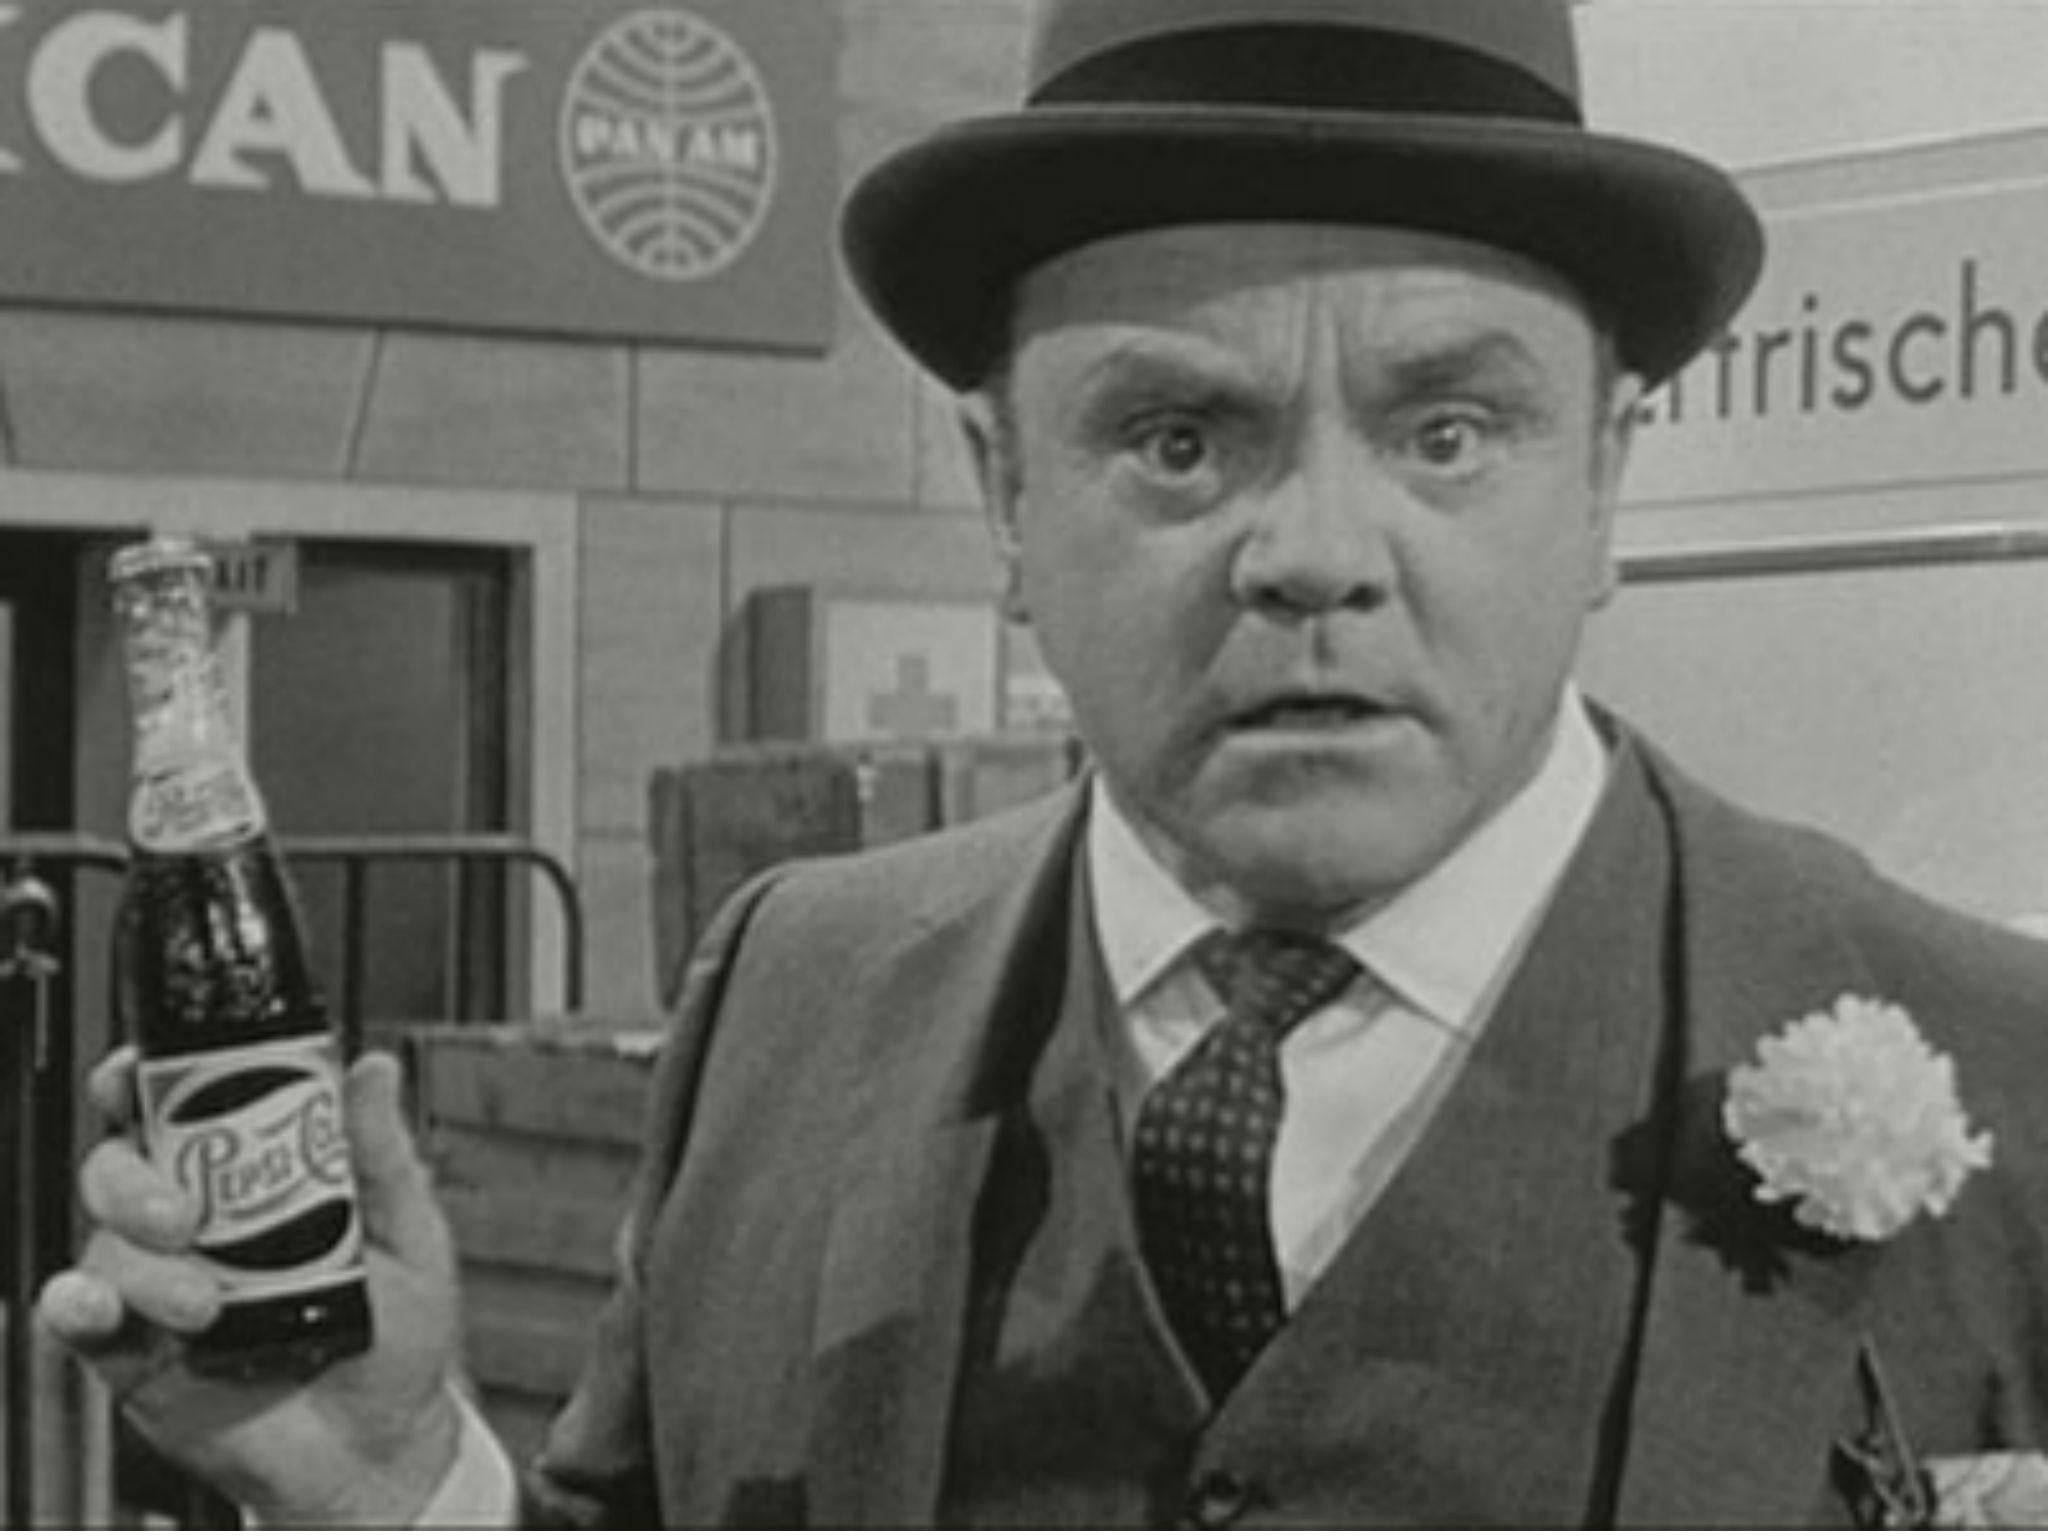 ‘One, Two, Three’ stars James Cagney as CR ‘Mac’ MacNamara, a Coca-Cola executive in West Berlin during the Cold War who is assigned with the task of looking after his employer's socialite daughter